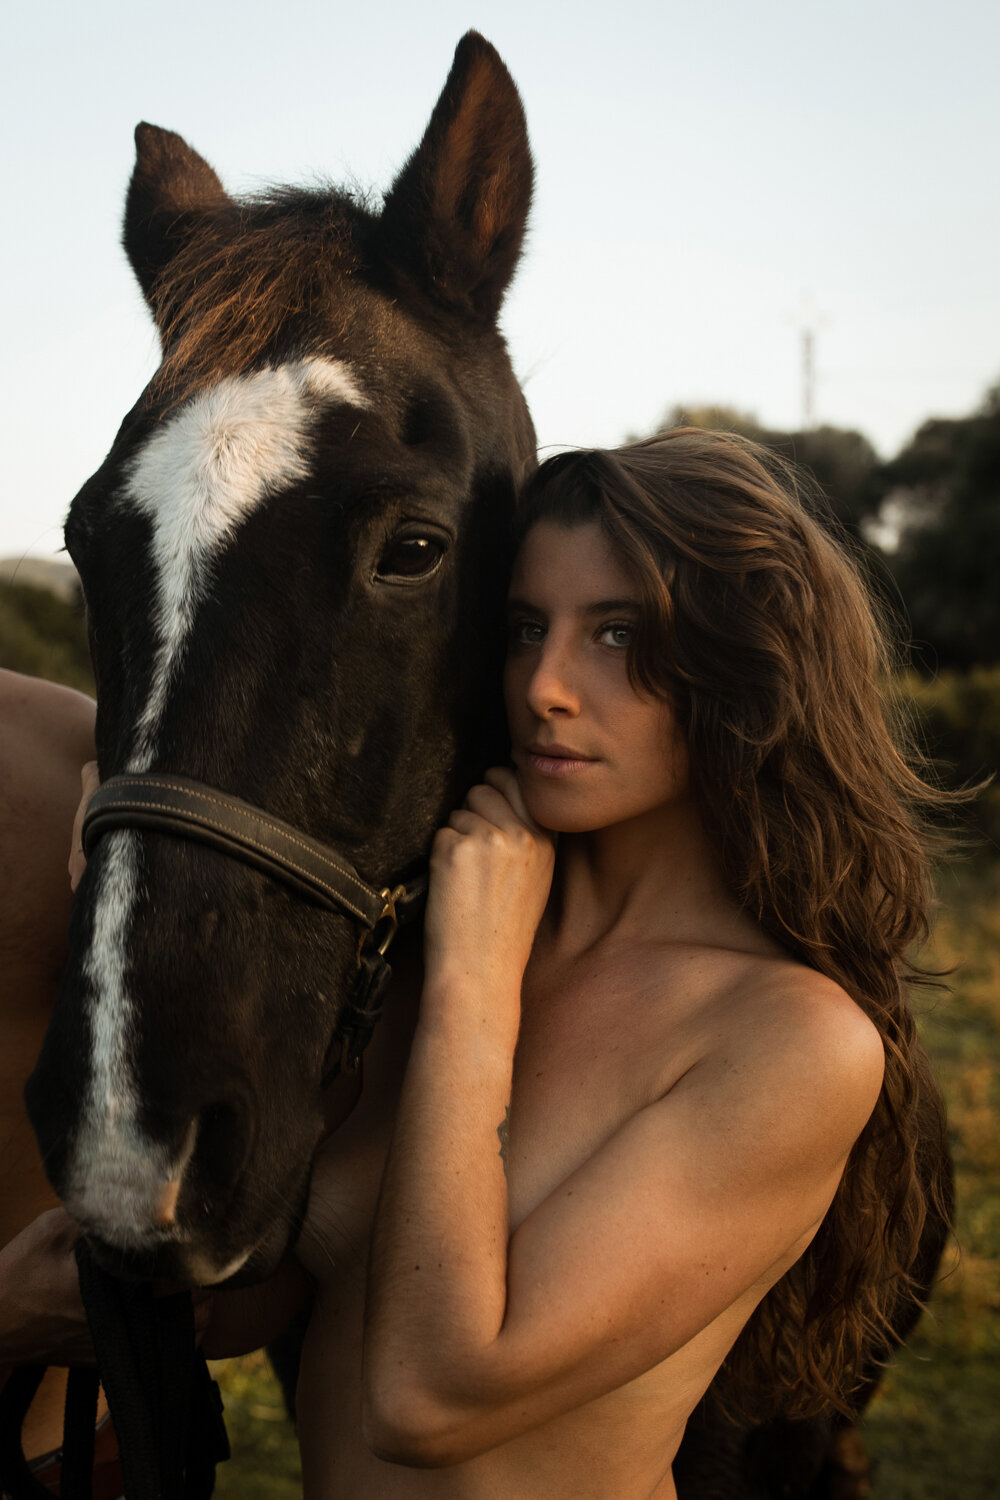 Immortale corsica corse beauty products beautiful horse model produits beaute beach travel Krista Espino sea island mediterranean photographe photographer fashion lifestyle editorial nature natural france french skin skincare face mask rose country-27.jpg